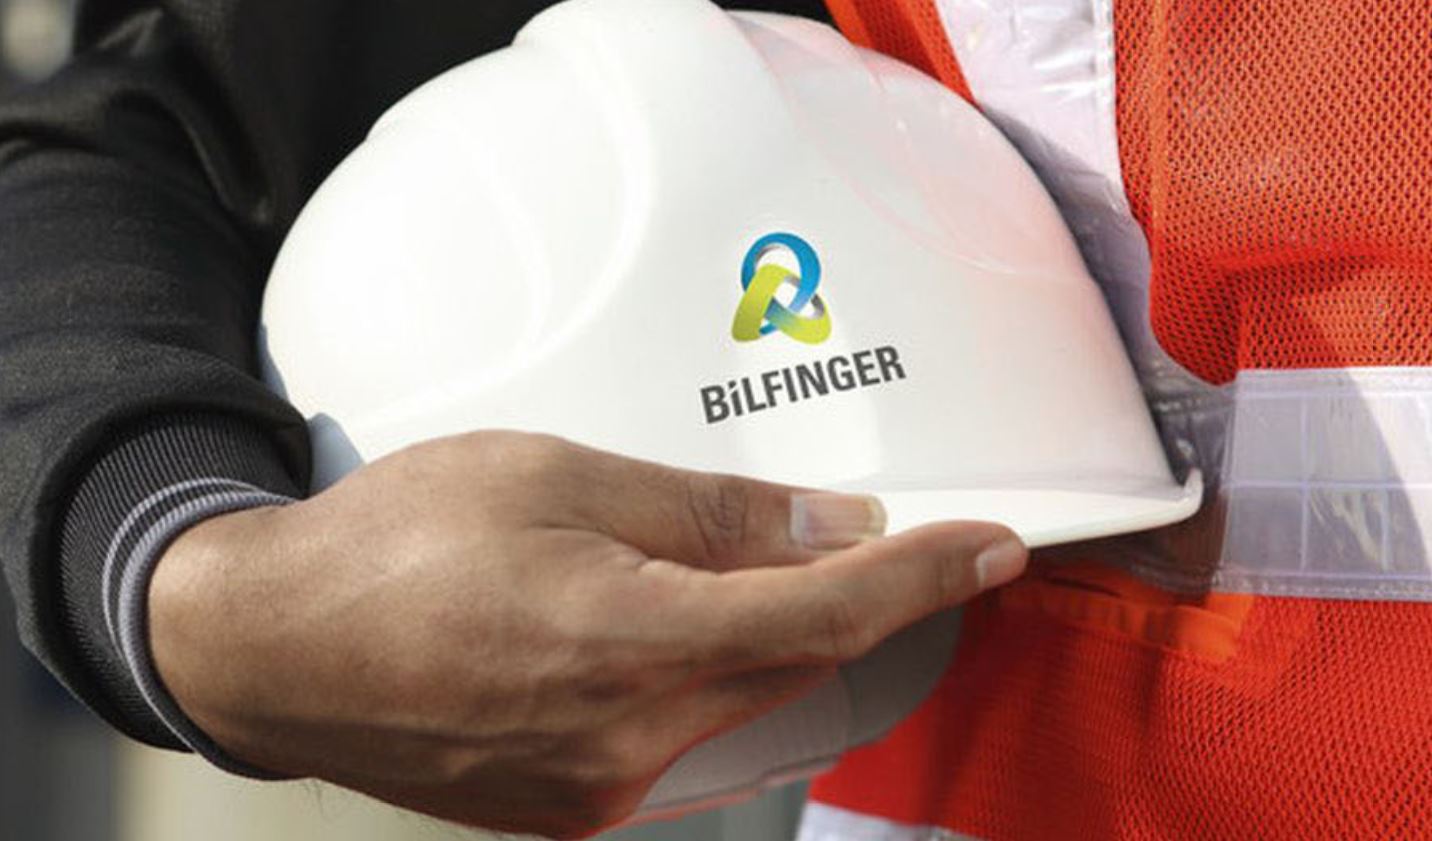 Around 170 workers could be axed as Bilfinger places staff into redundancy consultation.